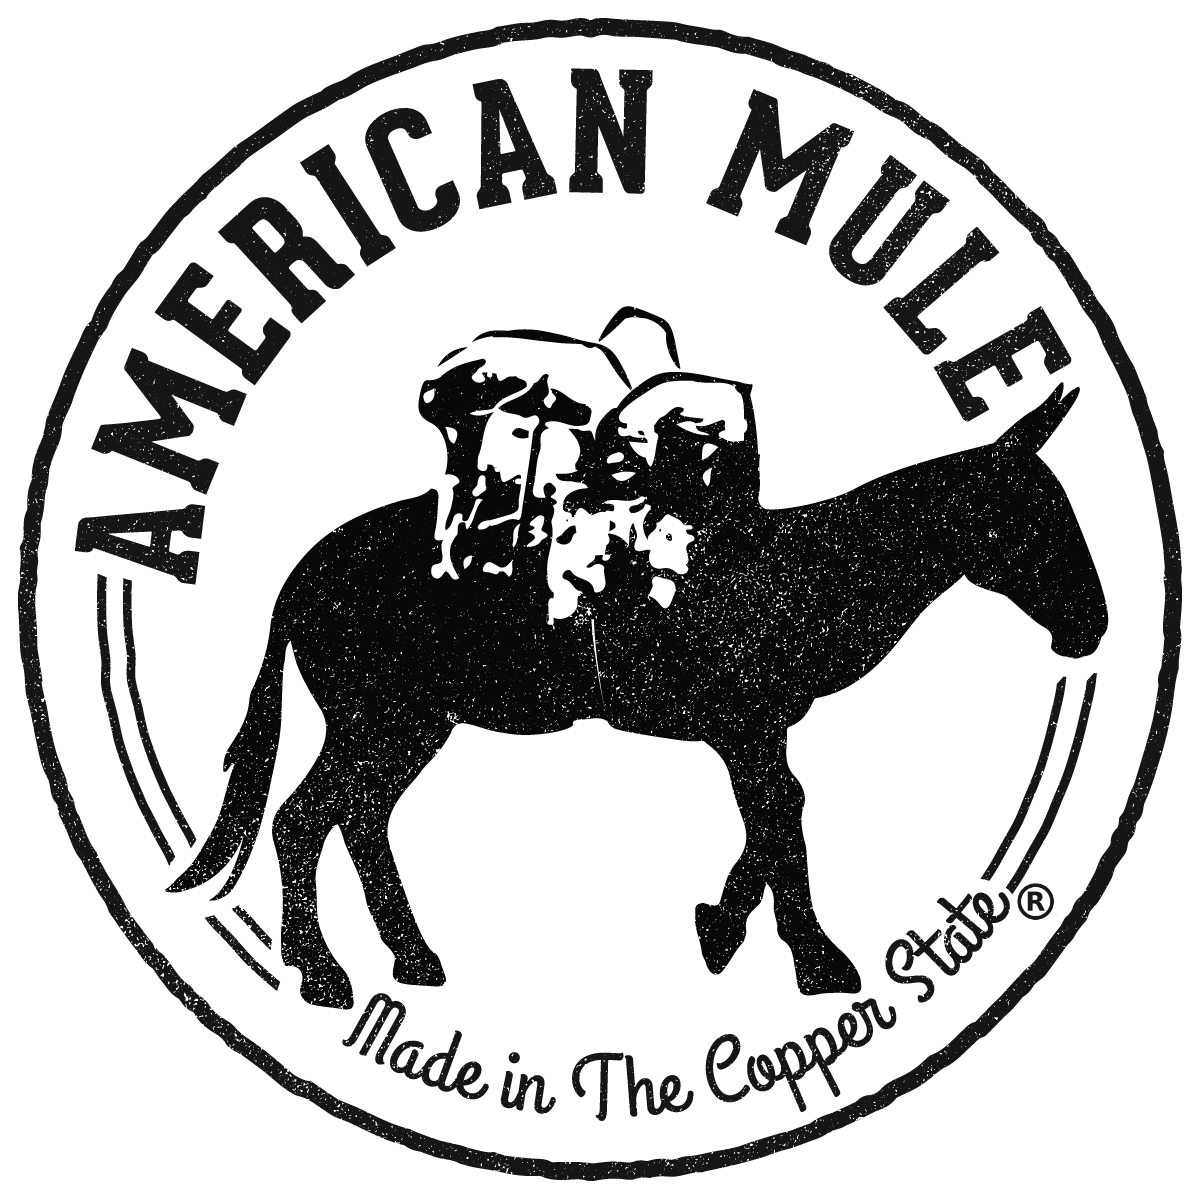 Theamericanmule